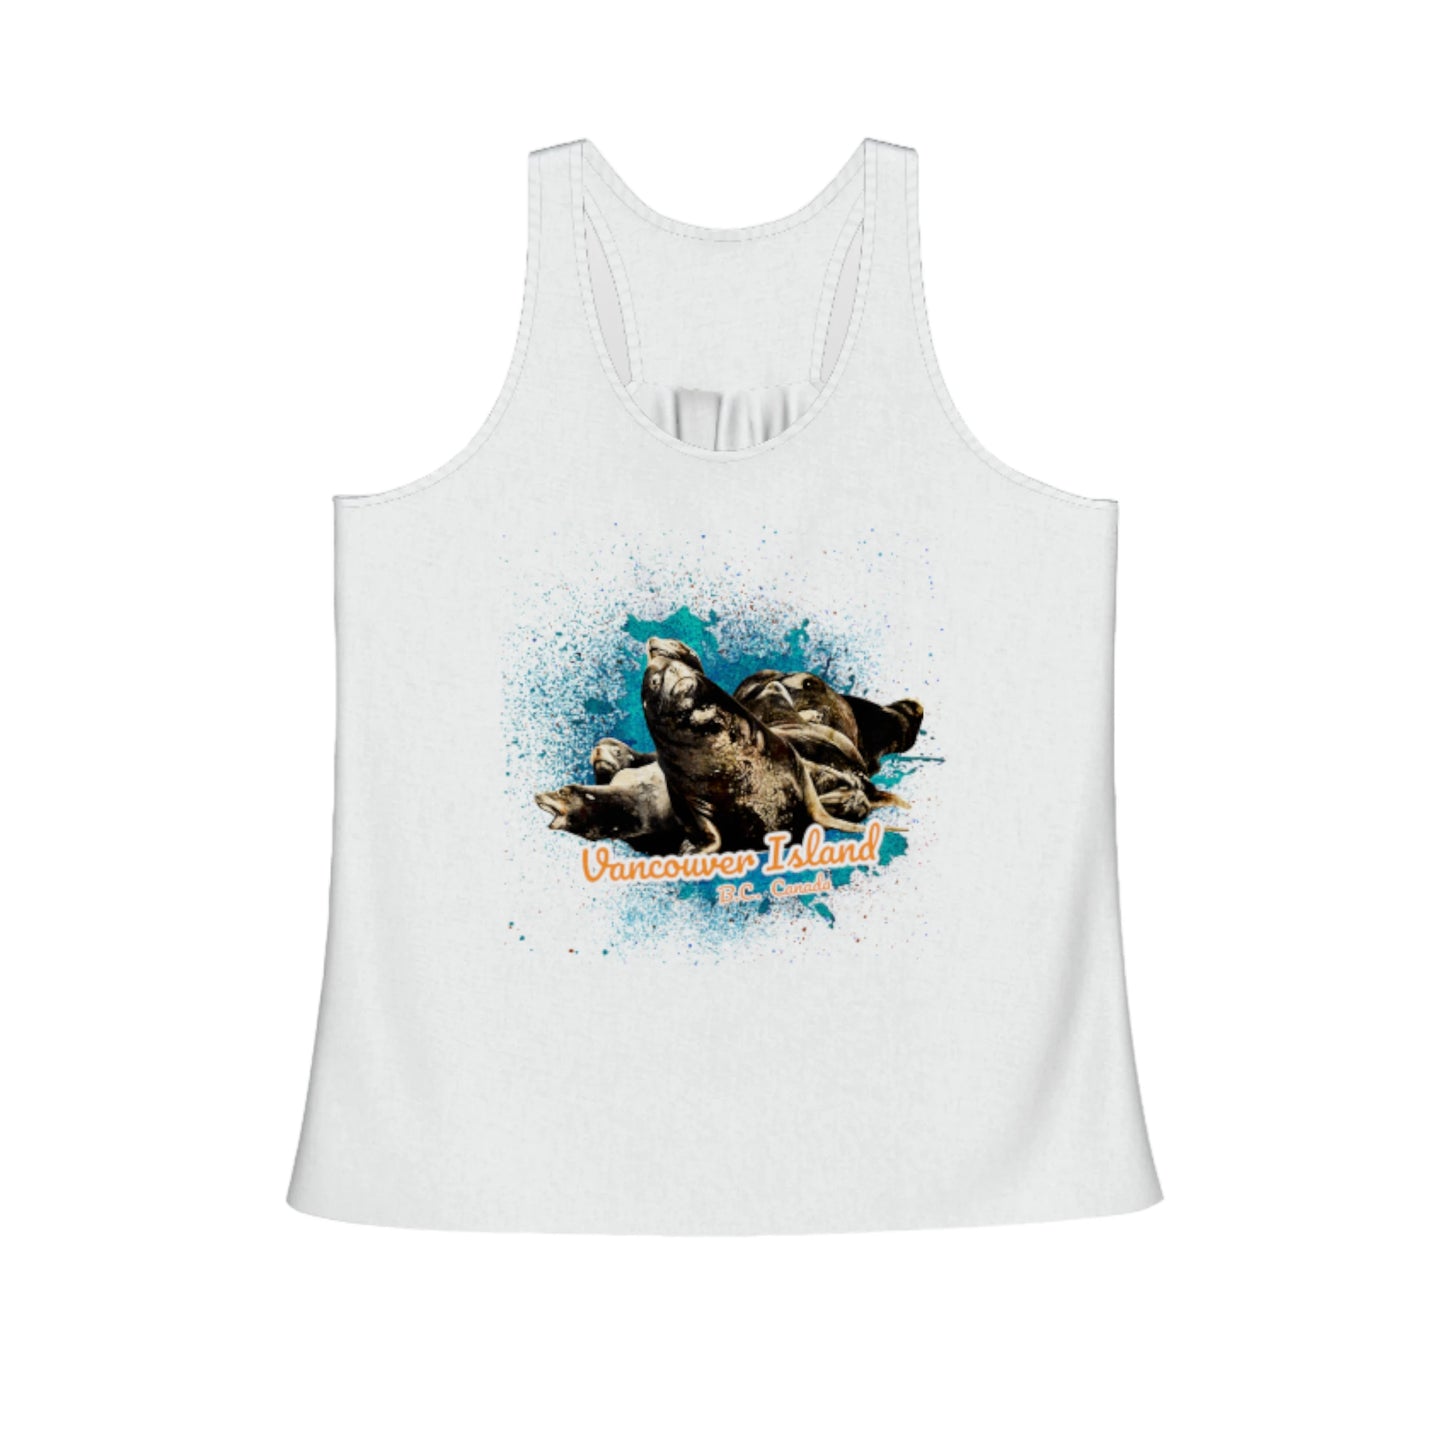 What's Up? Sea Lions Vancouver Island BC Canada Flow racerback tank top. The images on the front is of a group of sea lions floating on a raft of logs. by Van isle goddess dot com